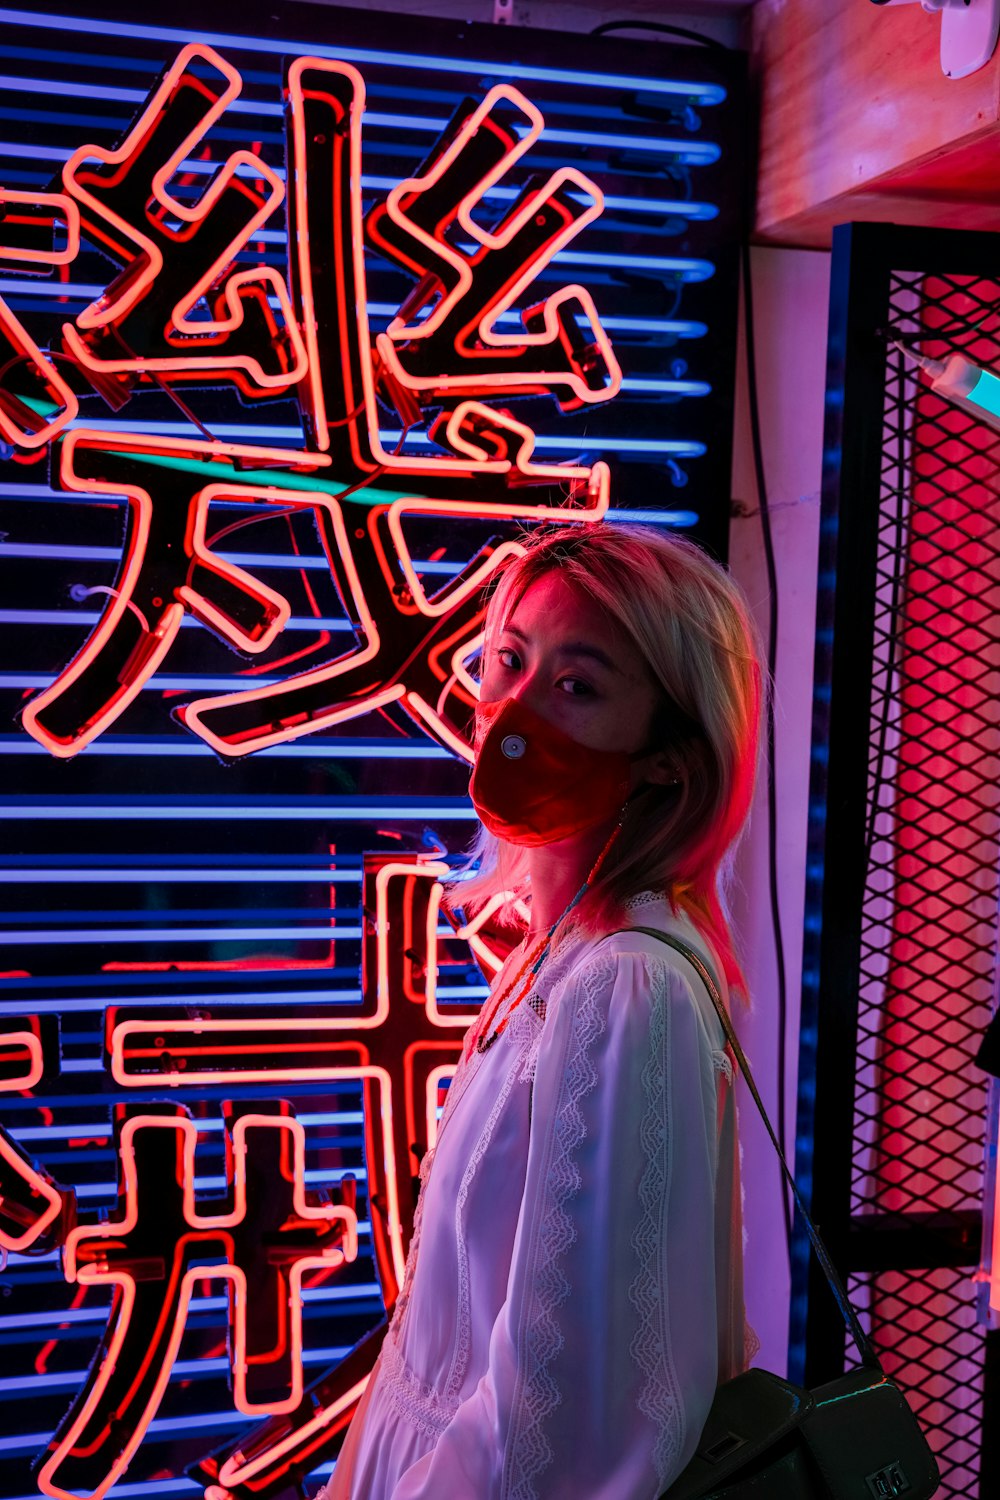 woman in white shirt standing near red and blue neon light signage